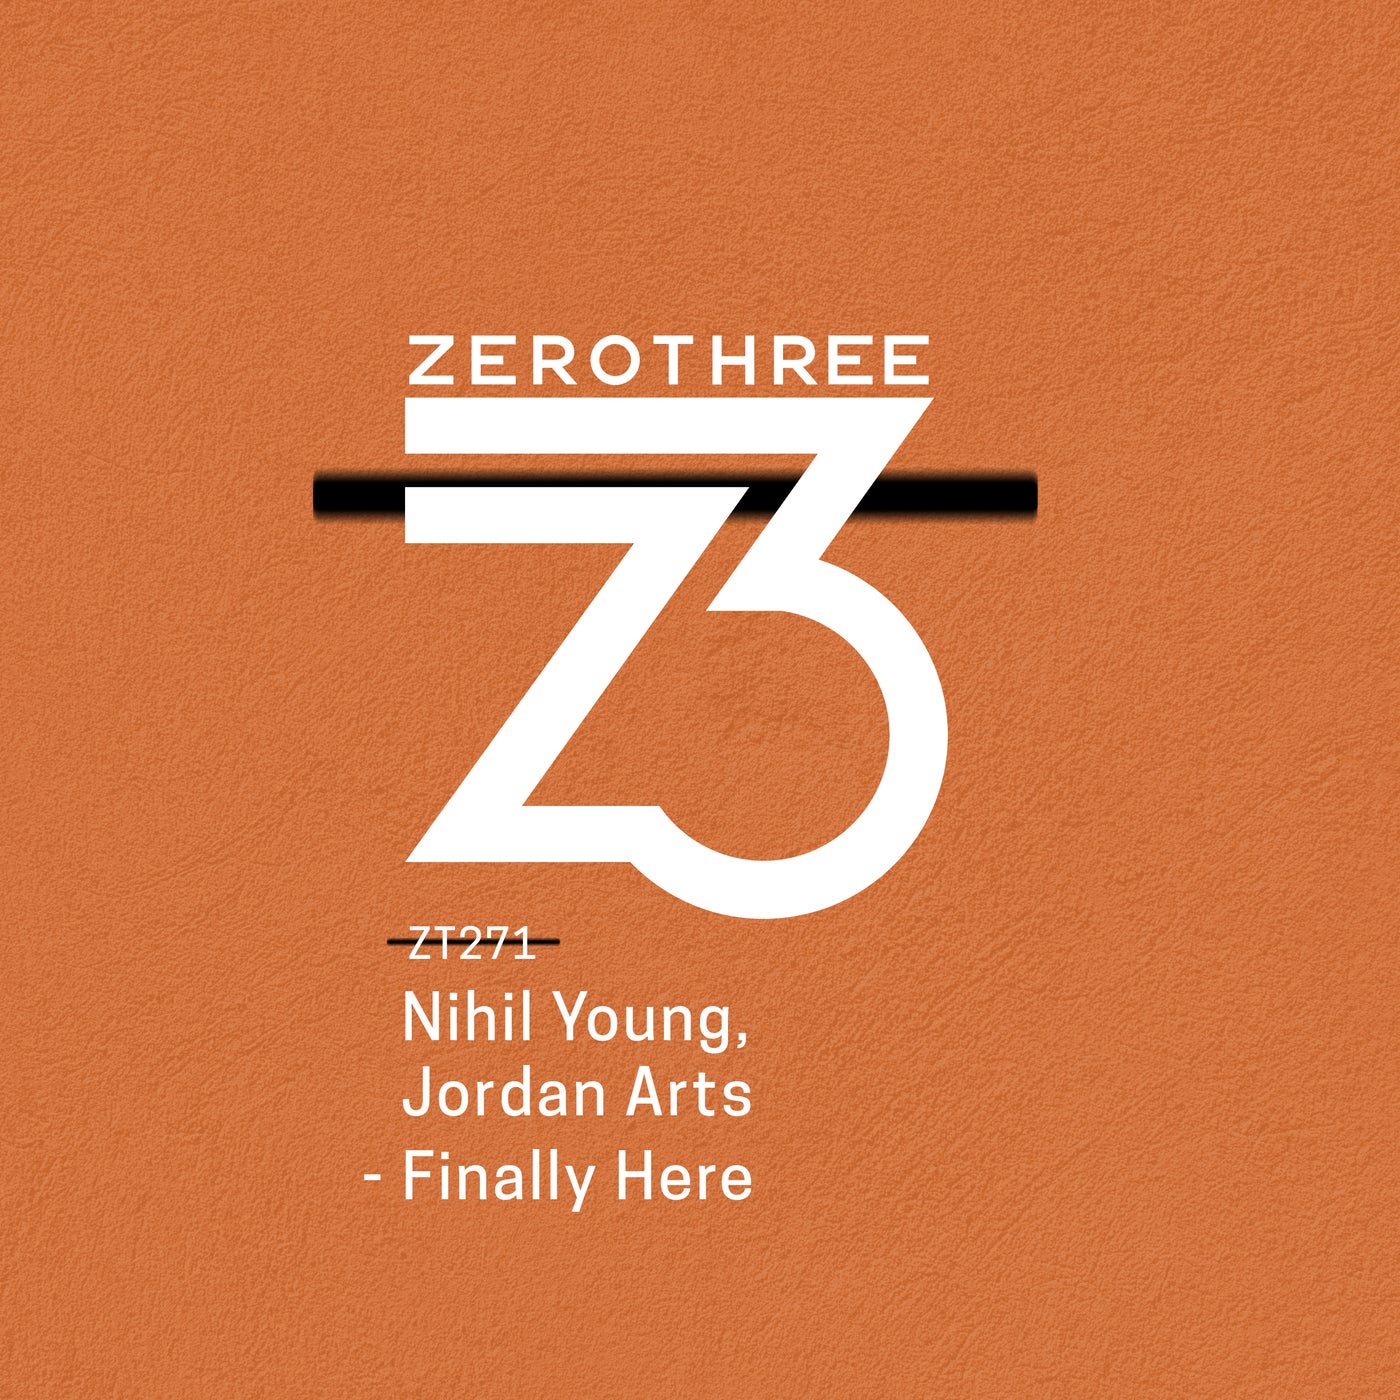 image cover: Nihil Young, Jordan Arts - Finally Here on Zerothree